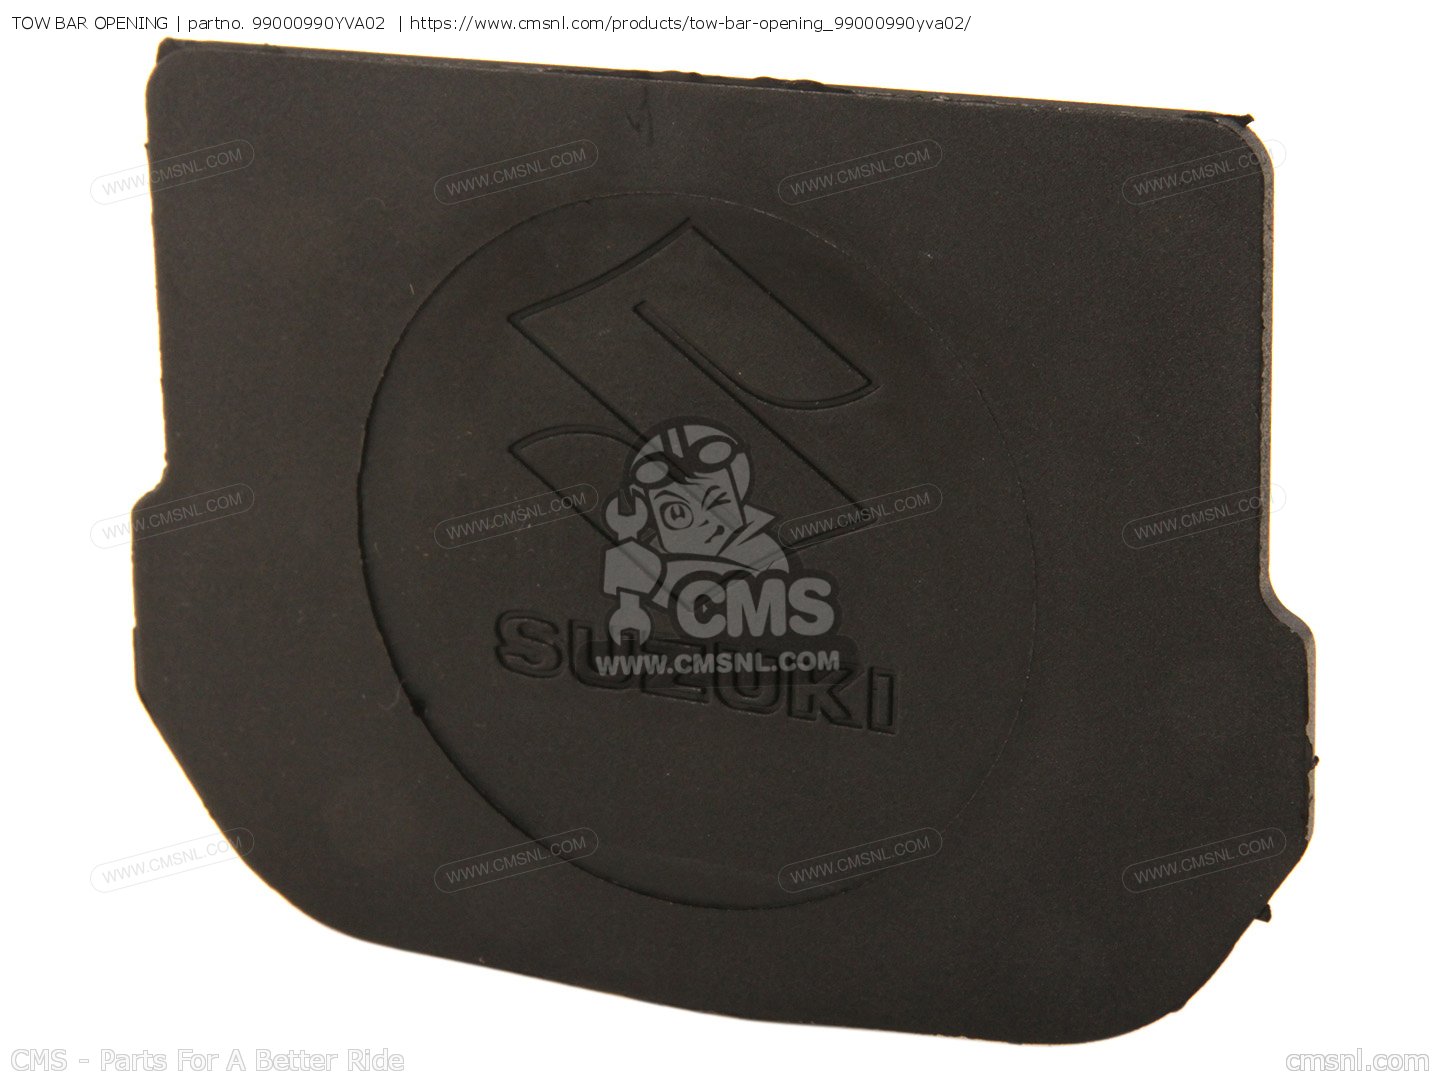 Genuine Suzuki Tow Bar Opening Cover 99000-990YV-A02 